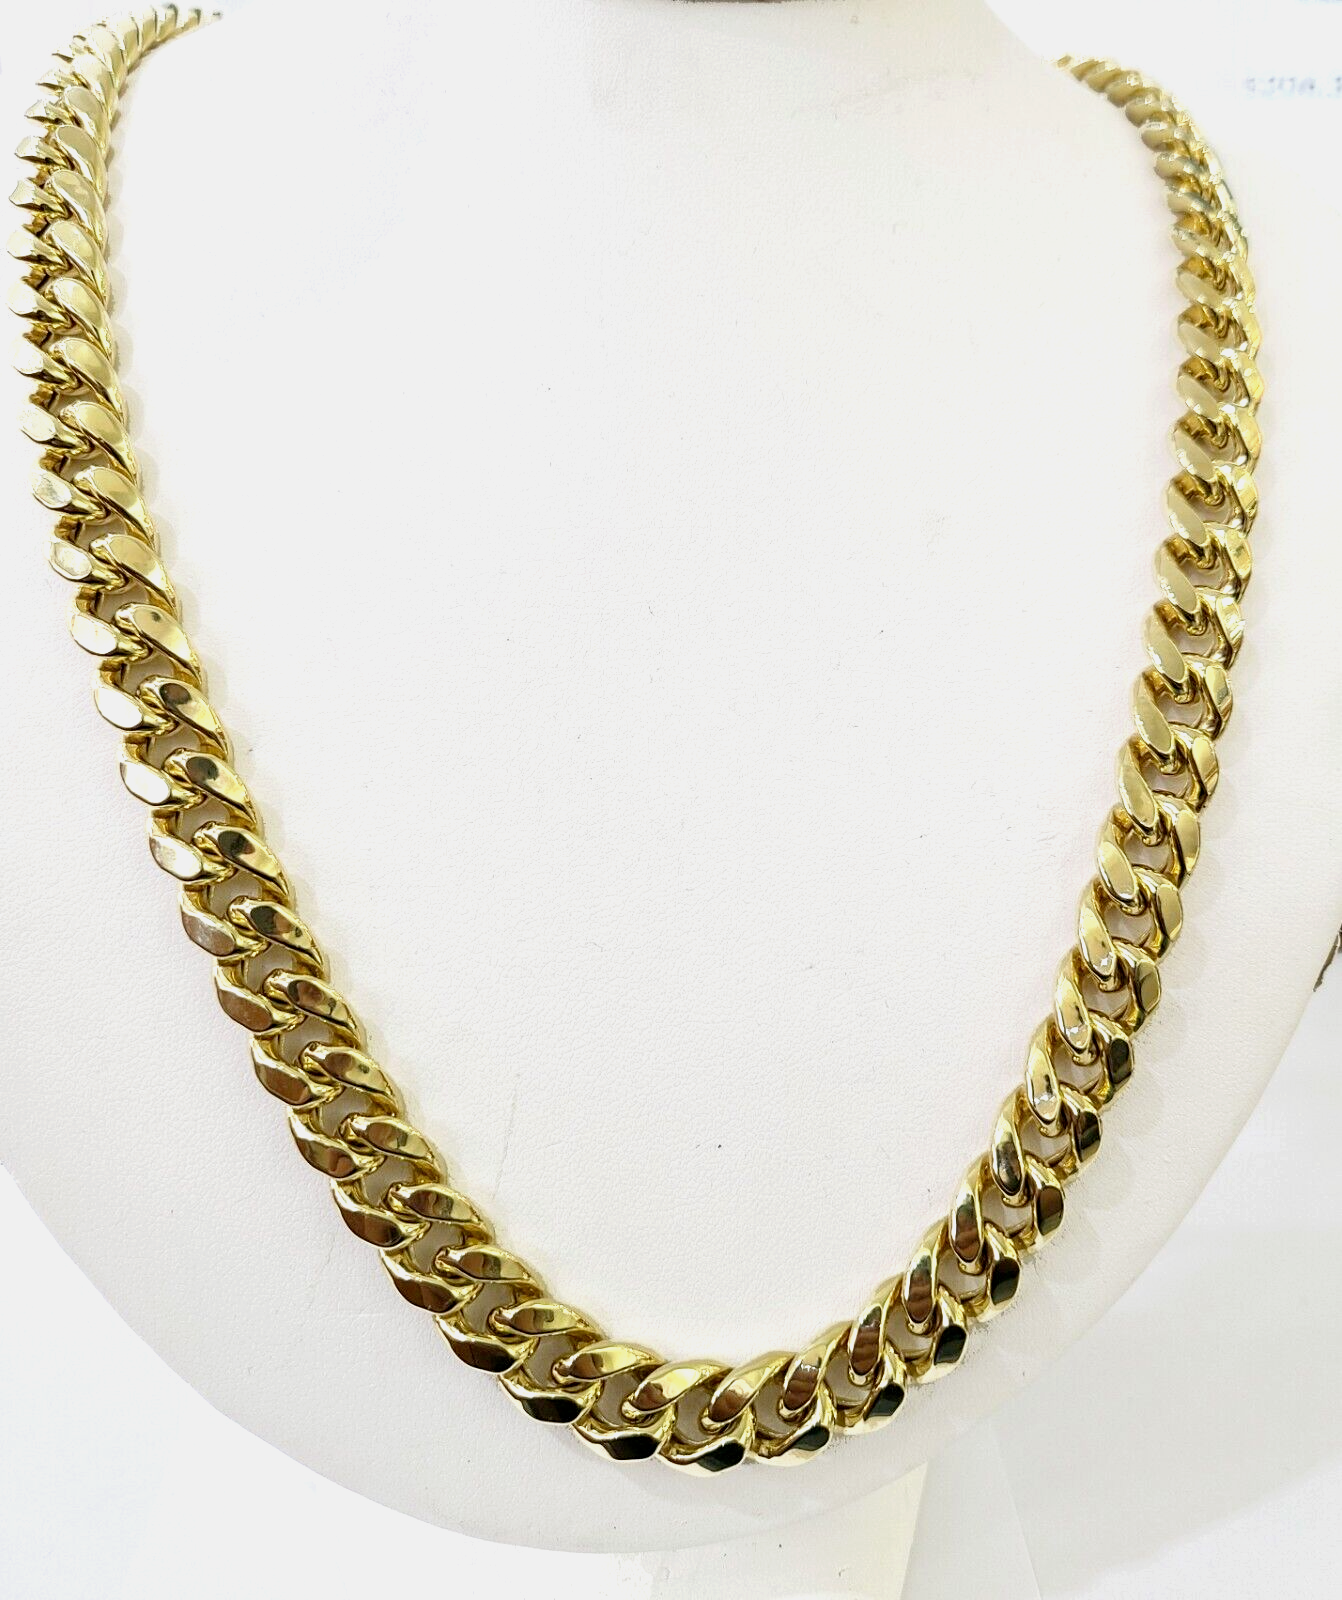 Real 14k Gold Miami Cuban Link Chain Necklace 11mm 26 inches Box lock 14kt